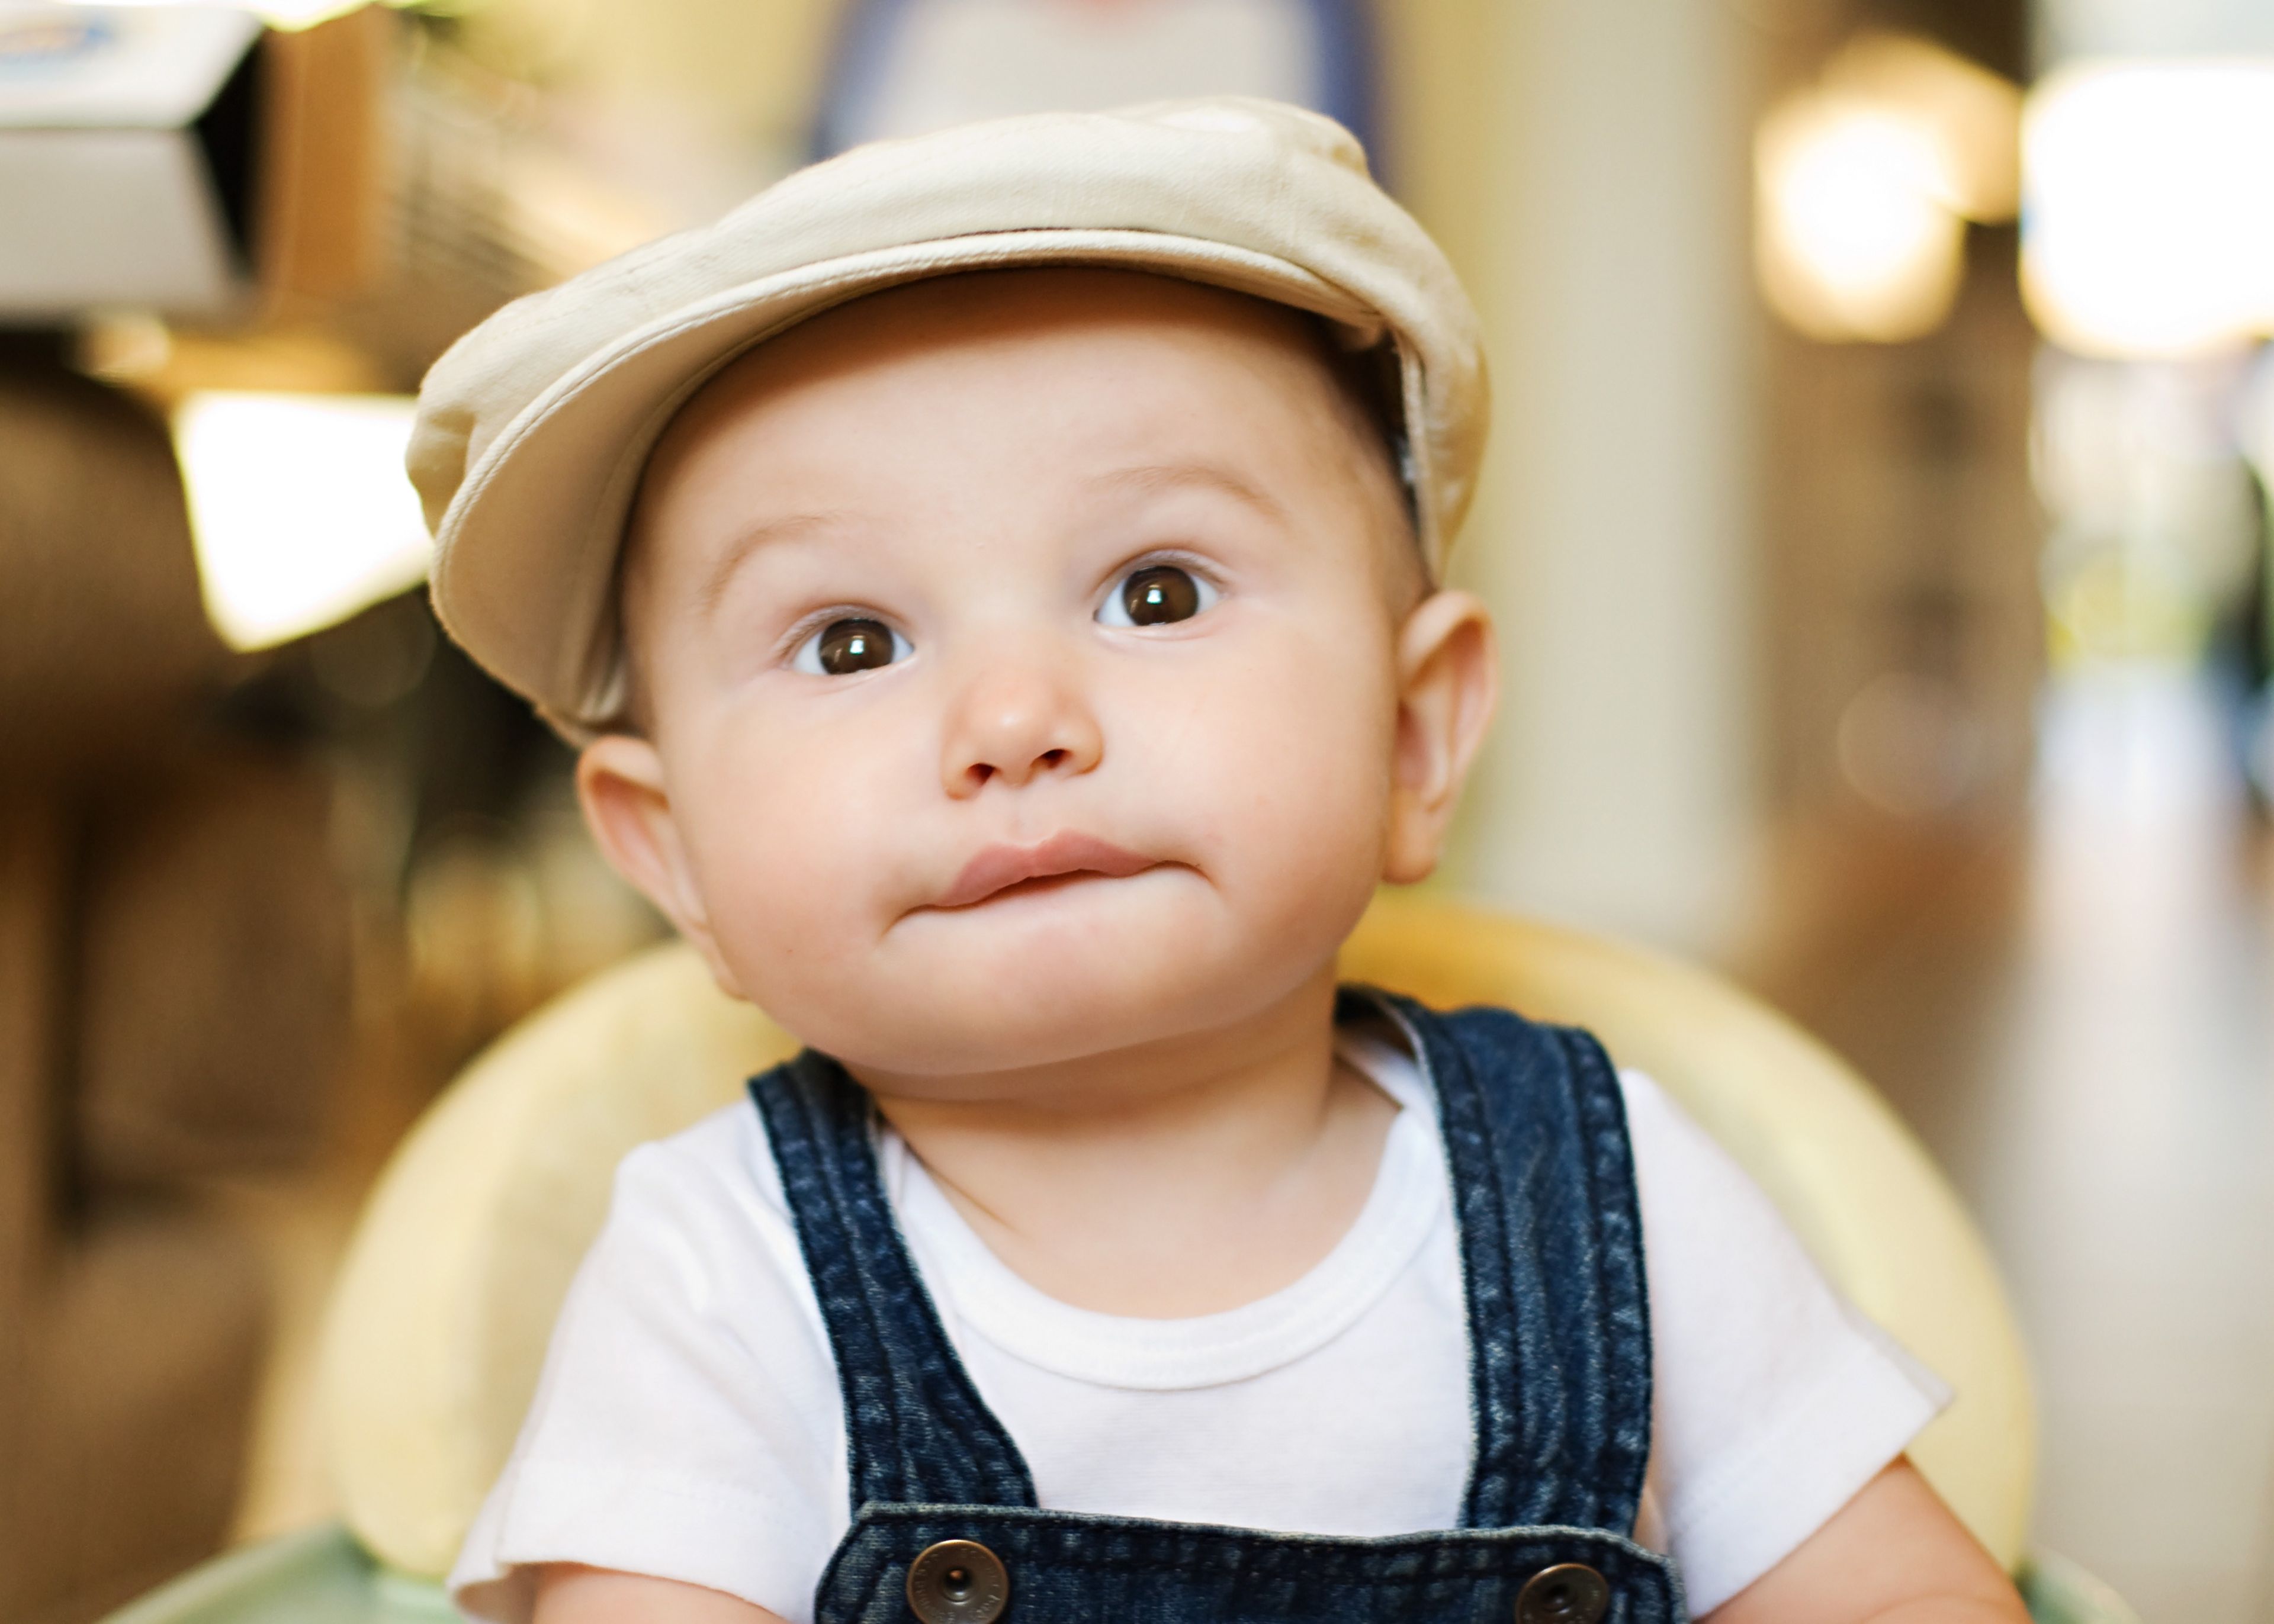 A baby boy in overalls and a hat.